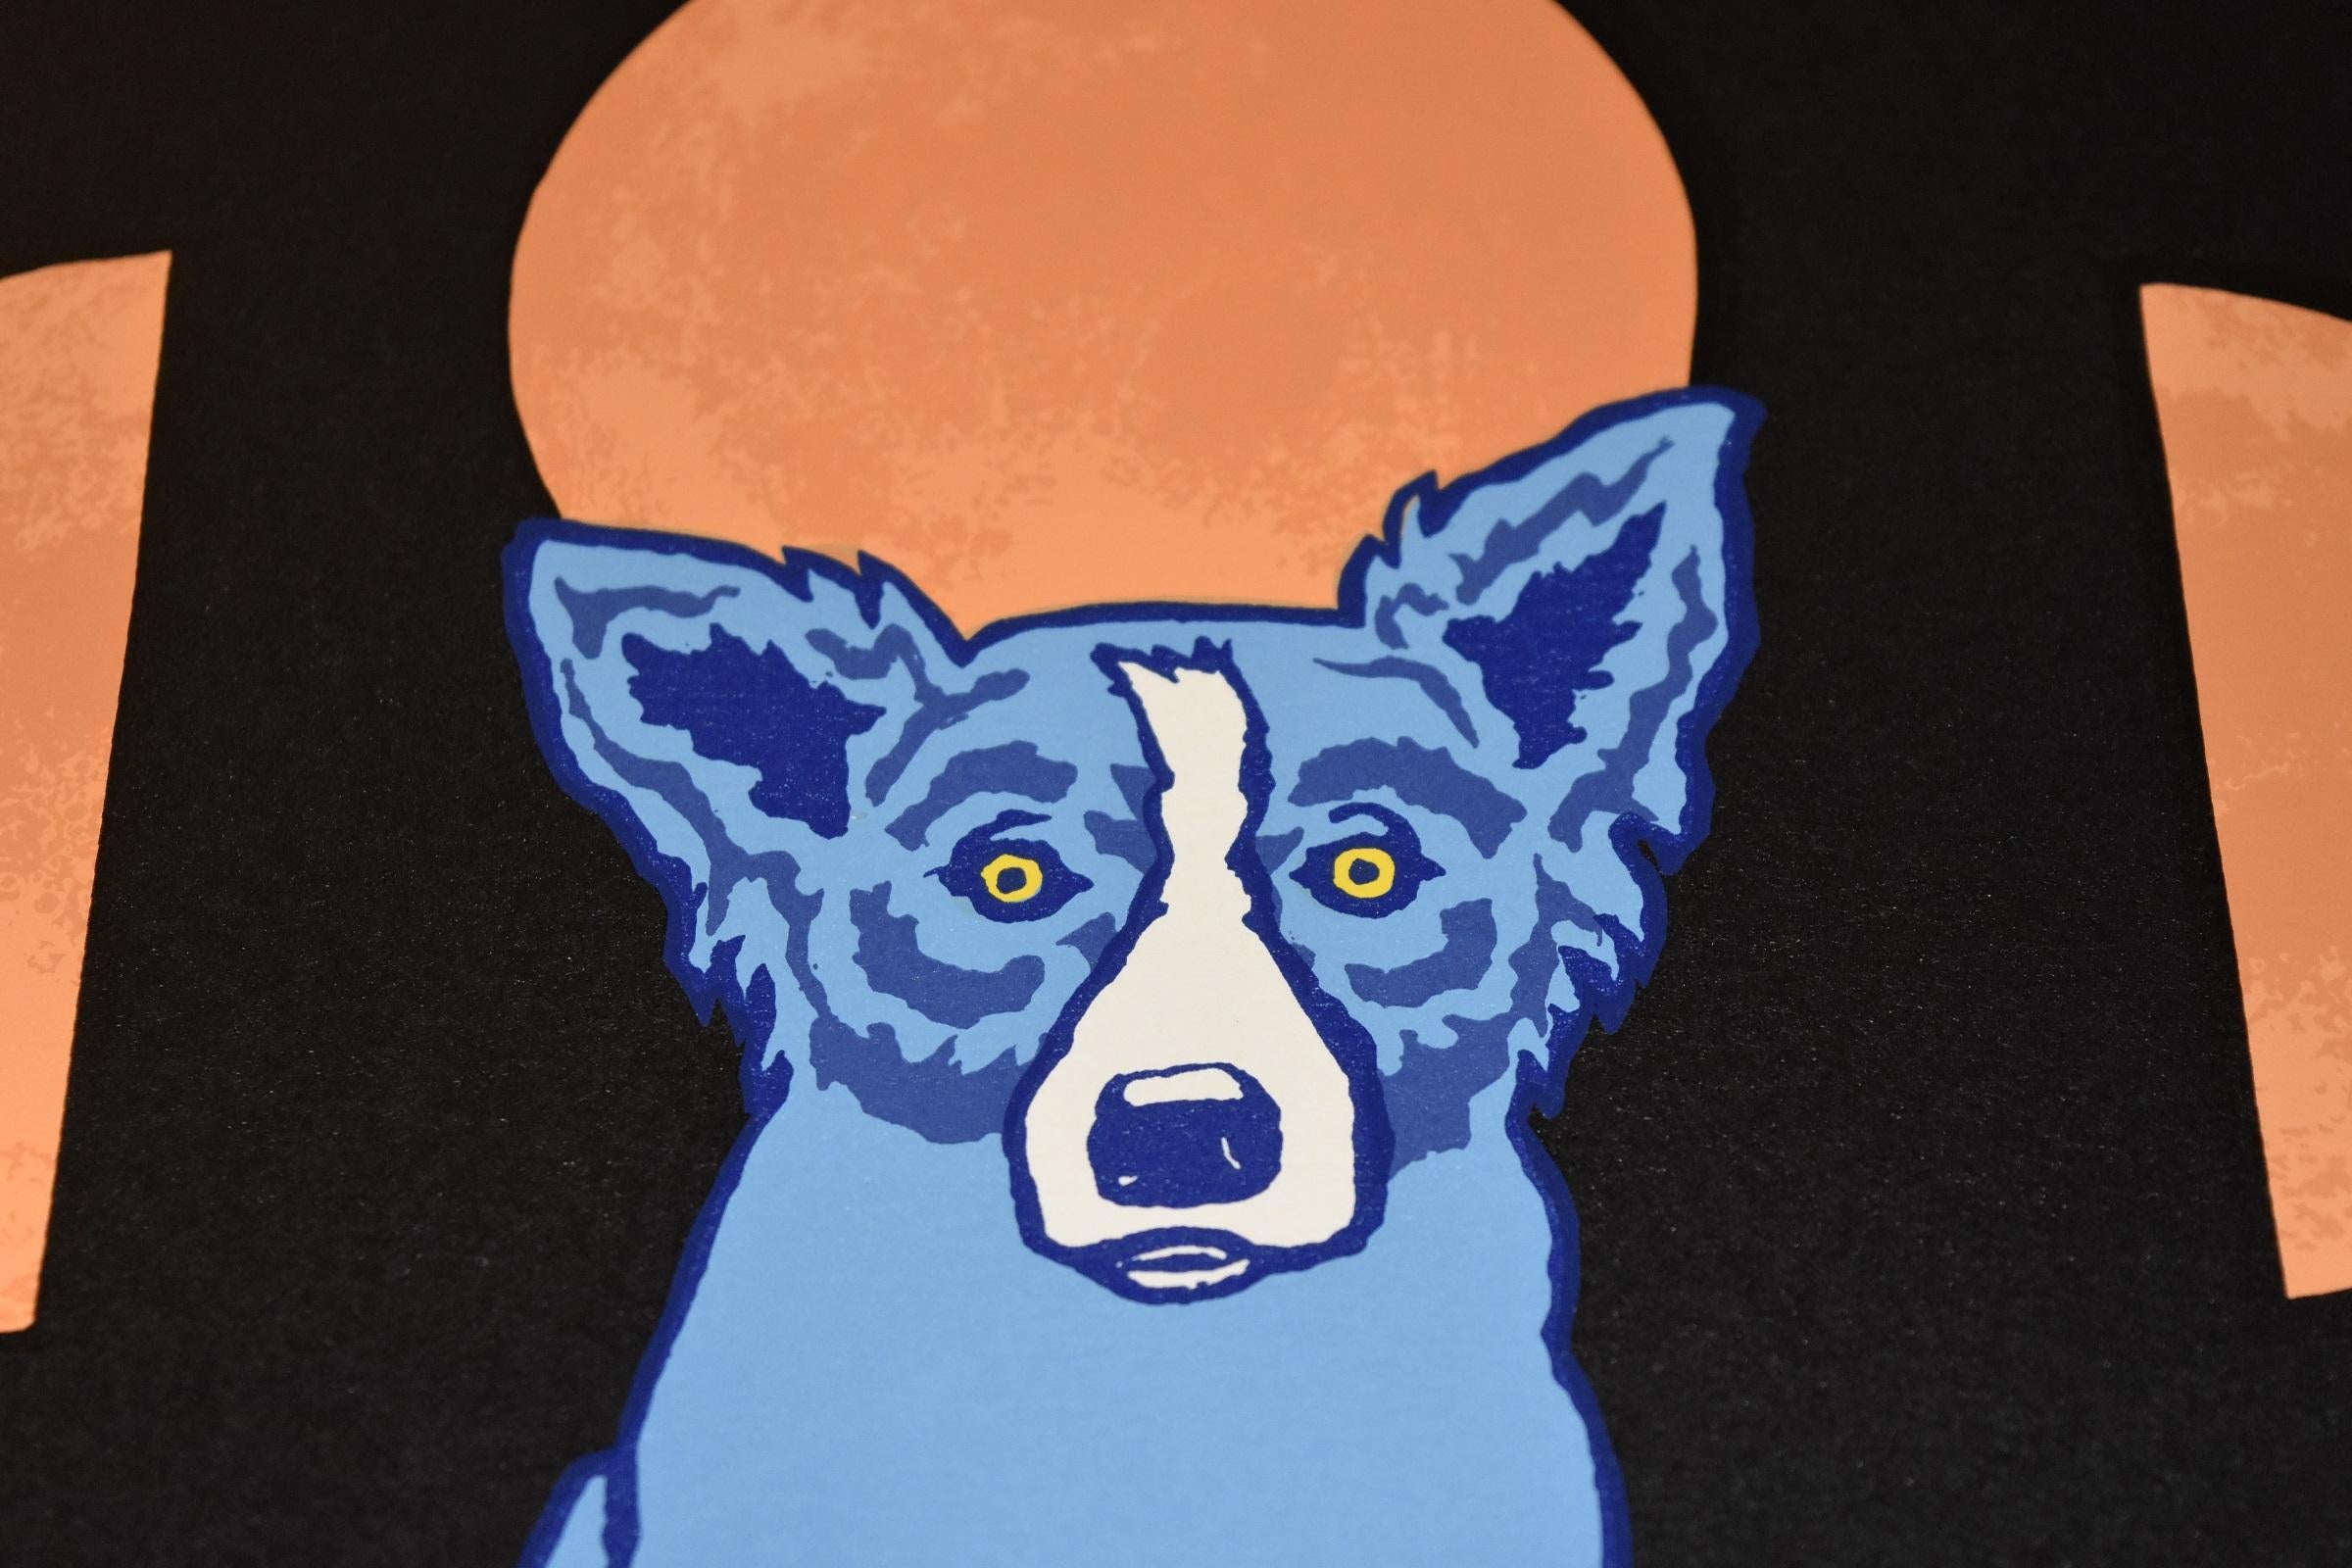 This Blue Dog work consists of a black background with the phases of the moon above a single blue dog sitting in the center.  The dog has soulful yellow eyes.  This pop art animal original silkscreen print on paper is guaranteed authentic and is